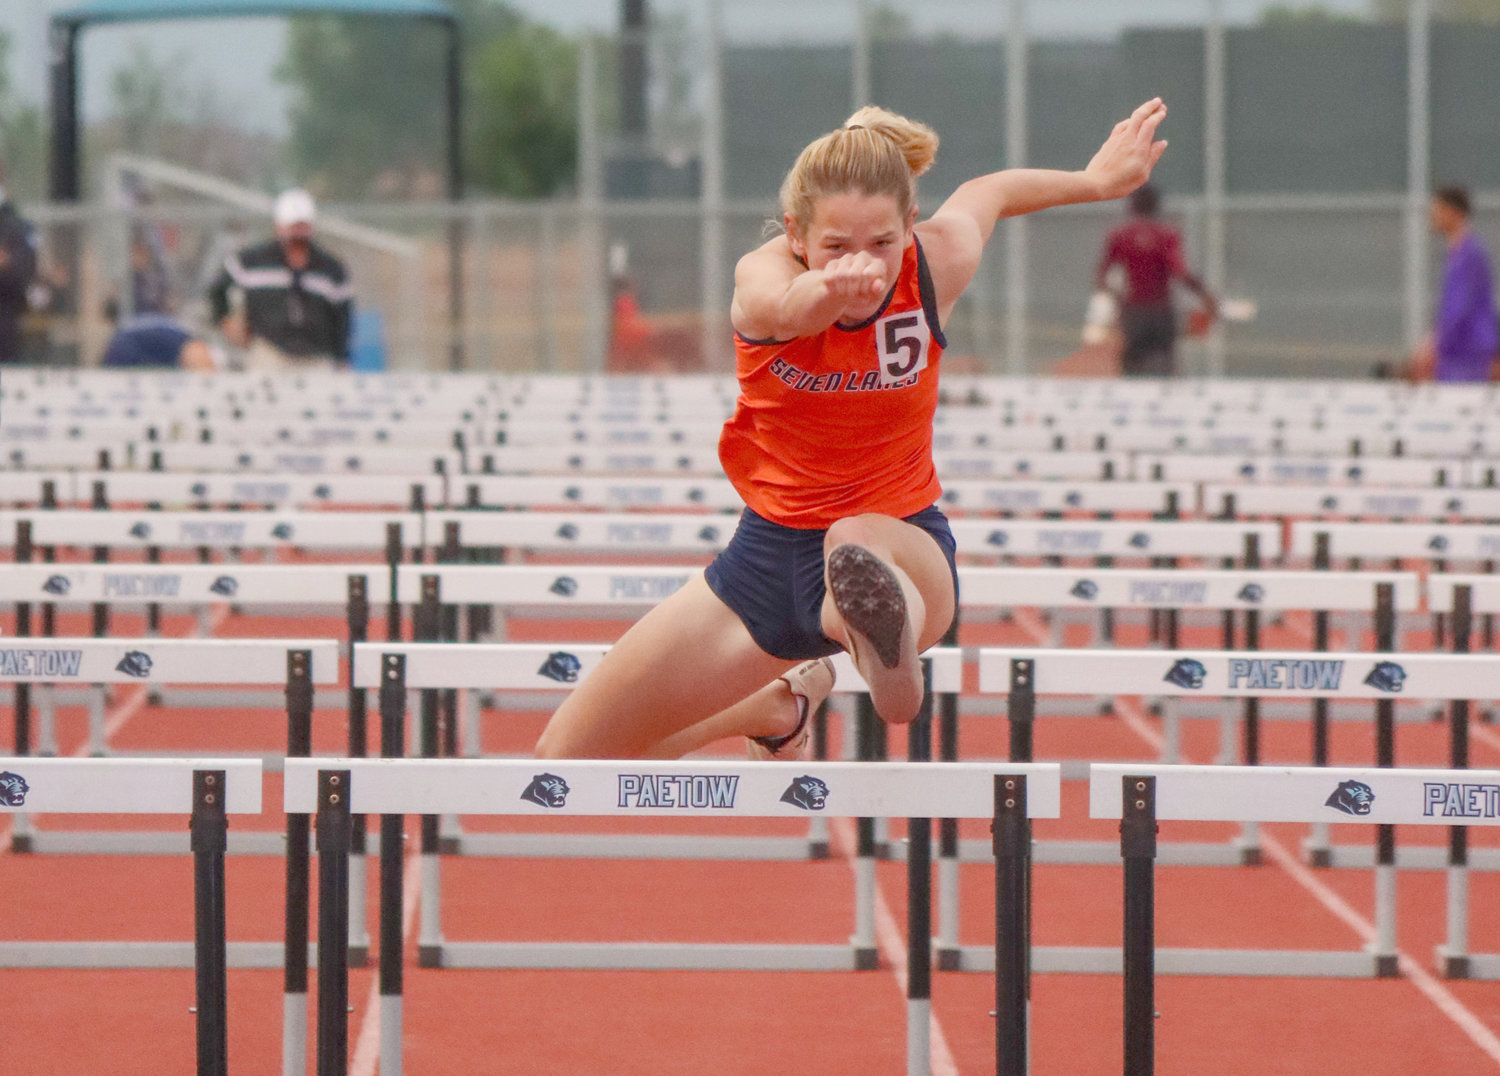 Seven Lakes senior Paige Boucher won gold in the 100-meter hurdles, silver in the 300-meter hurdles, and bronze in the long jump and triple jump at the 19-20-6A area meet on Thursday, April 15, at Paetow High.